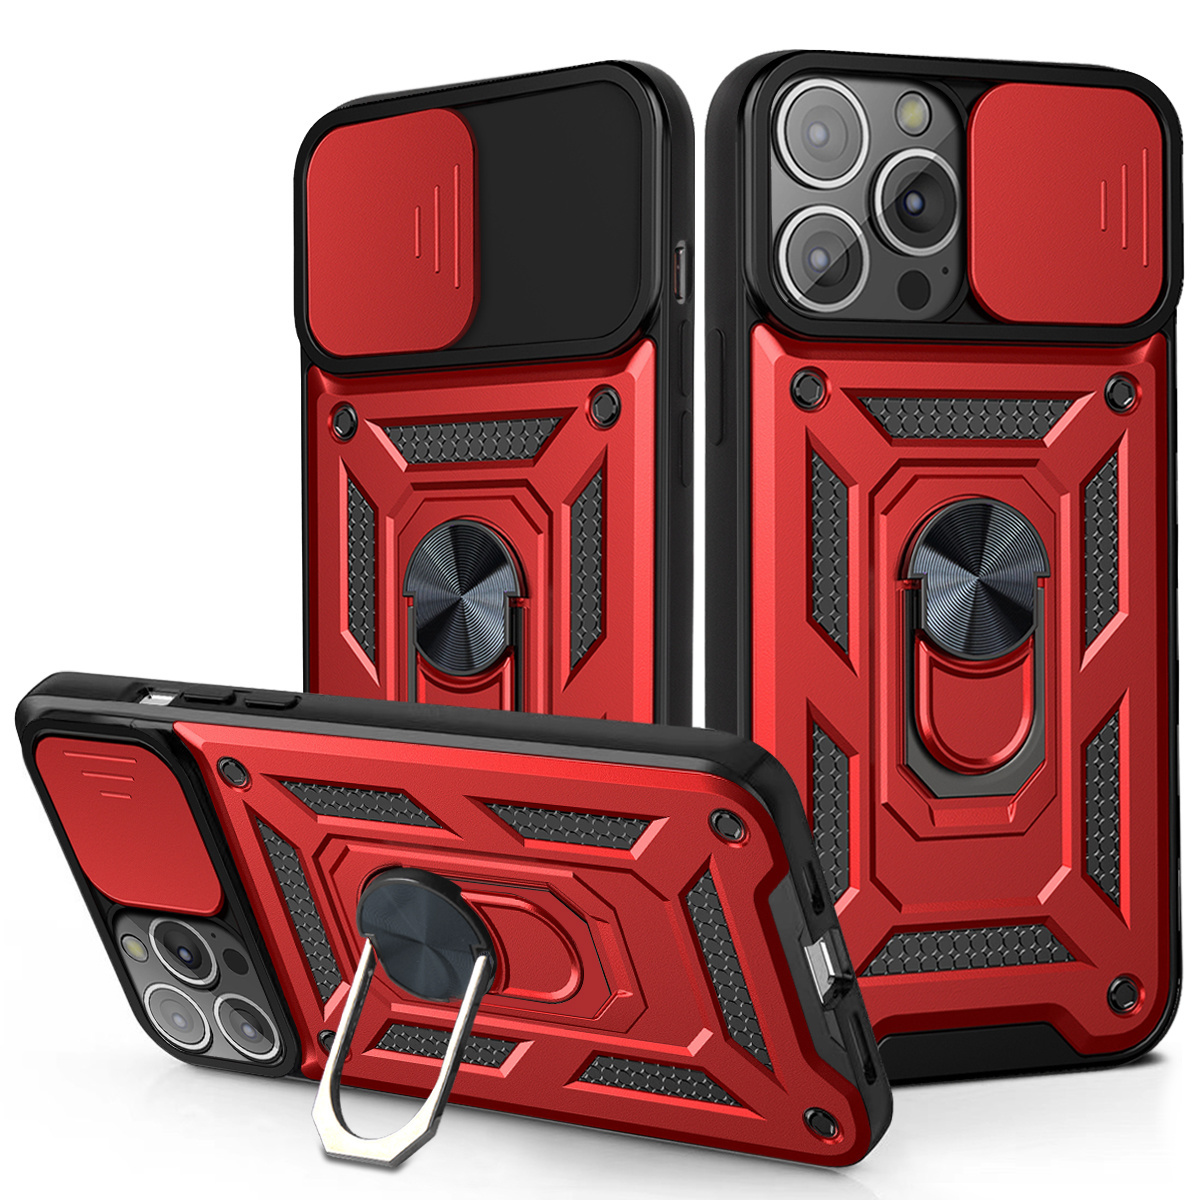 iPhone 14 Pro Max Rugged Armor Back Cover Hoesje met Camera Bescherming - Stevig - Heavy Duty - TPU - Apple iPhone 14 Pro Max - Rood